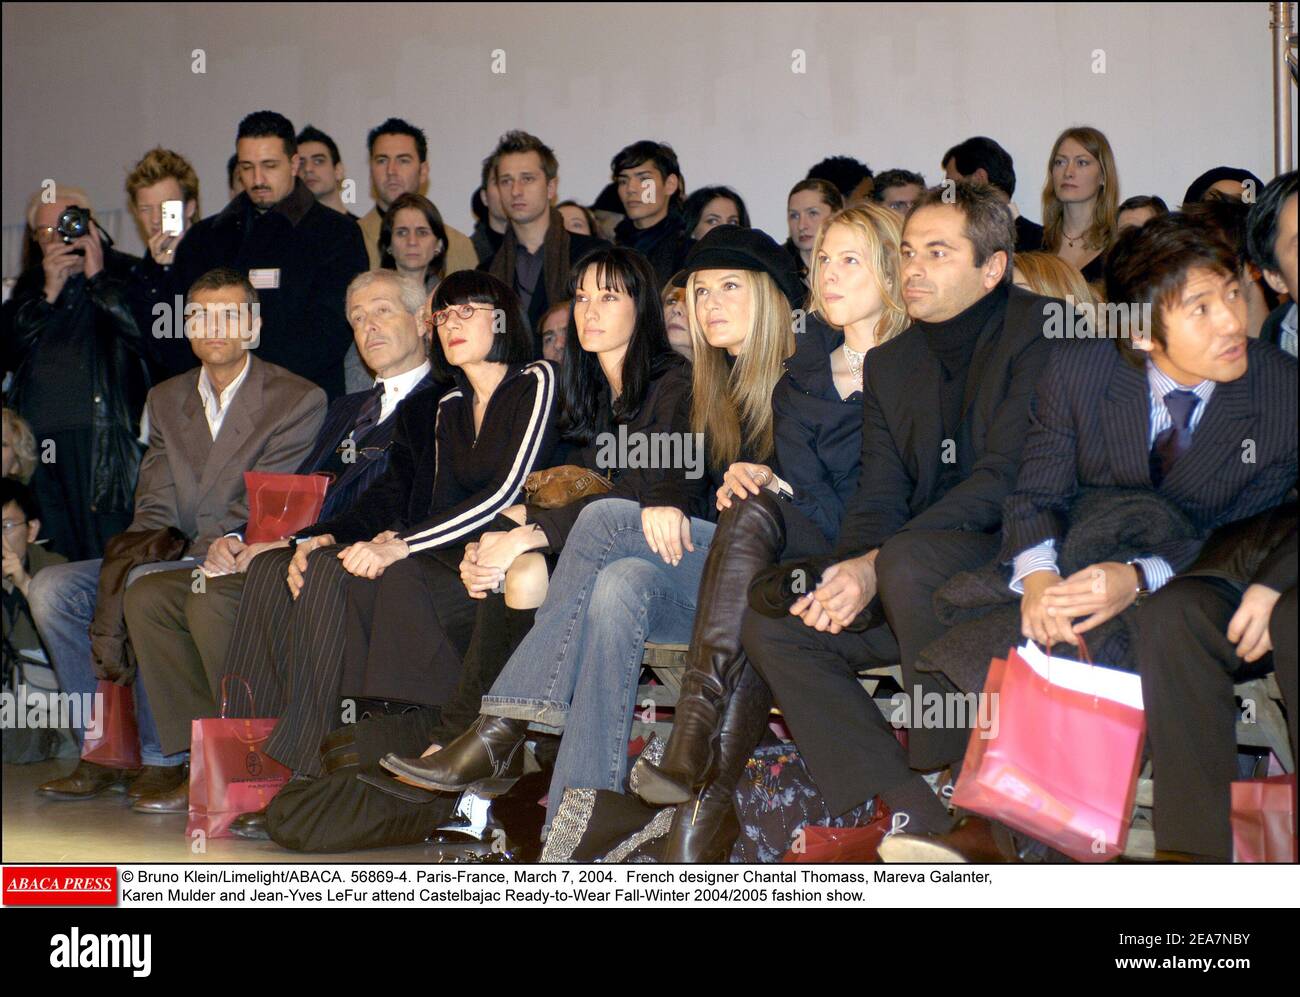 © Bruno Klein/Limelight/ABACA. 56869-4. Paris-France, March 7, 2004. French designer Chantal Thomass, Mareva Galanter, Karen Mulder and Jean-Yves LeFur attend Castelbajac Ready-to-Wear Fall-Winter 2004/2005 fashion show. Stock Photo